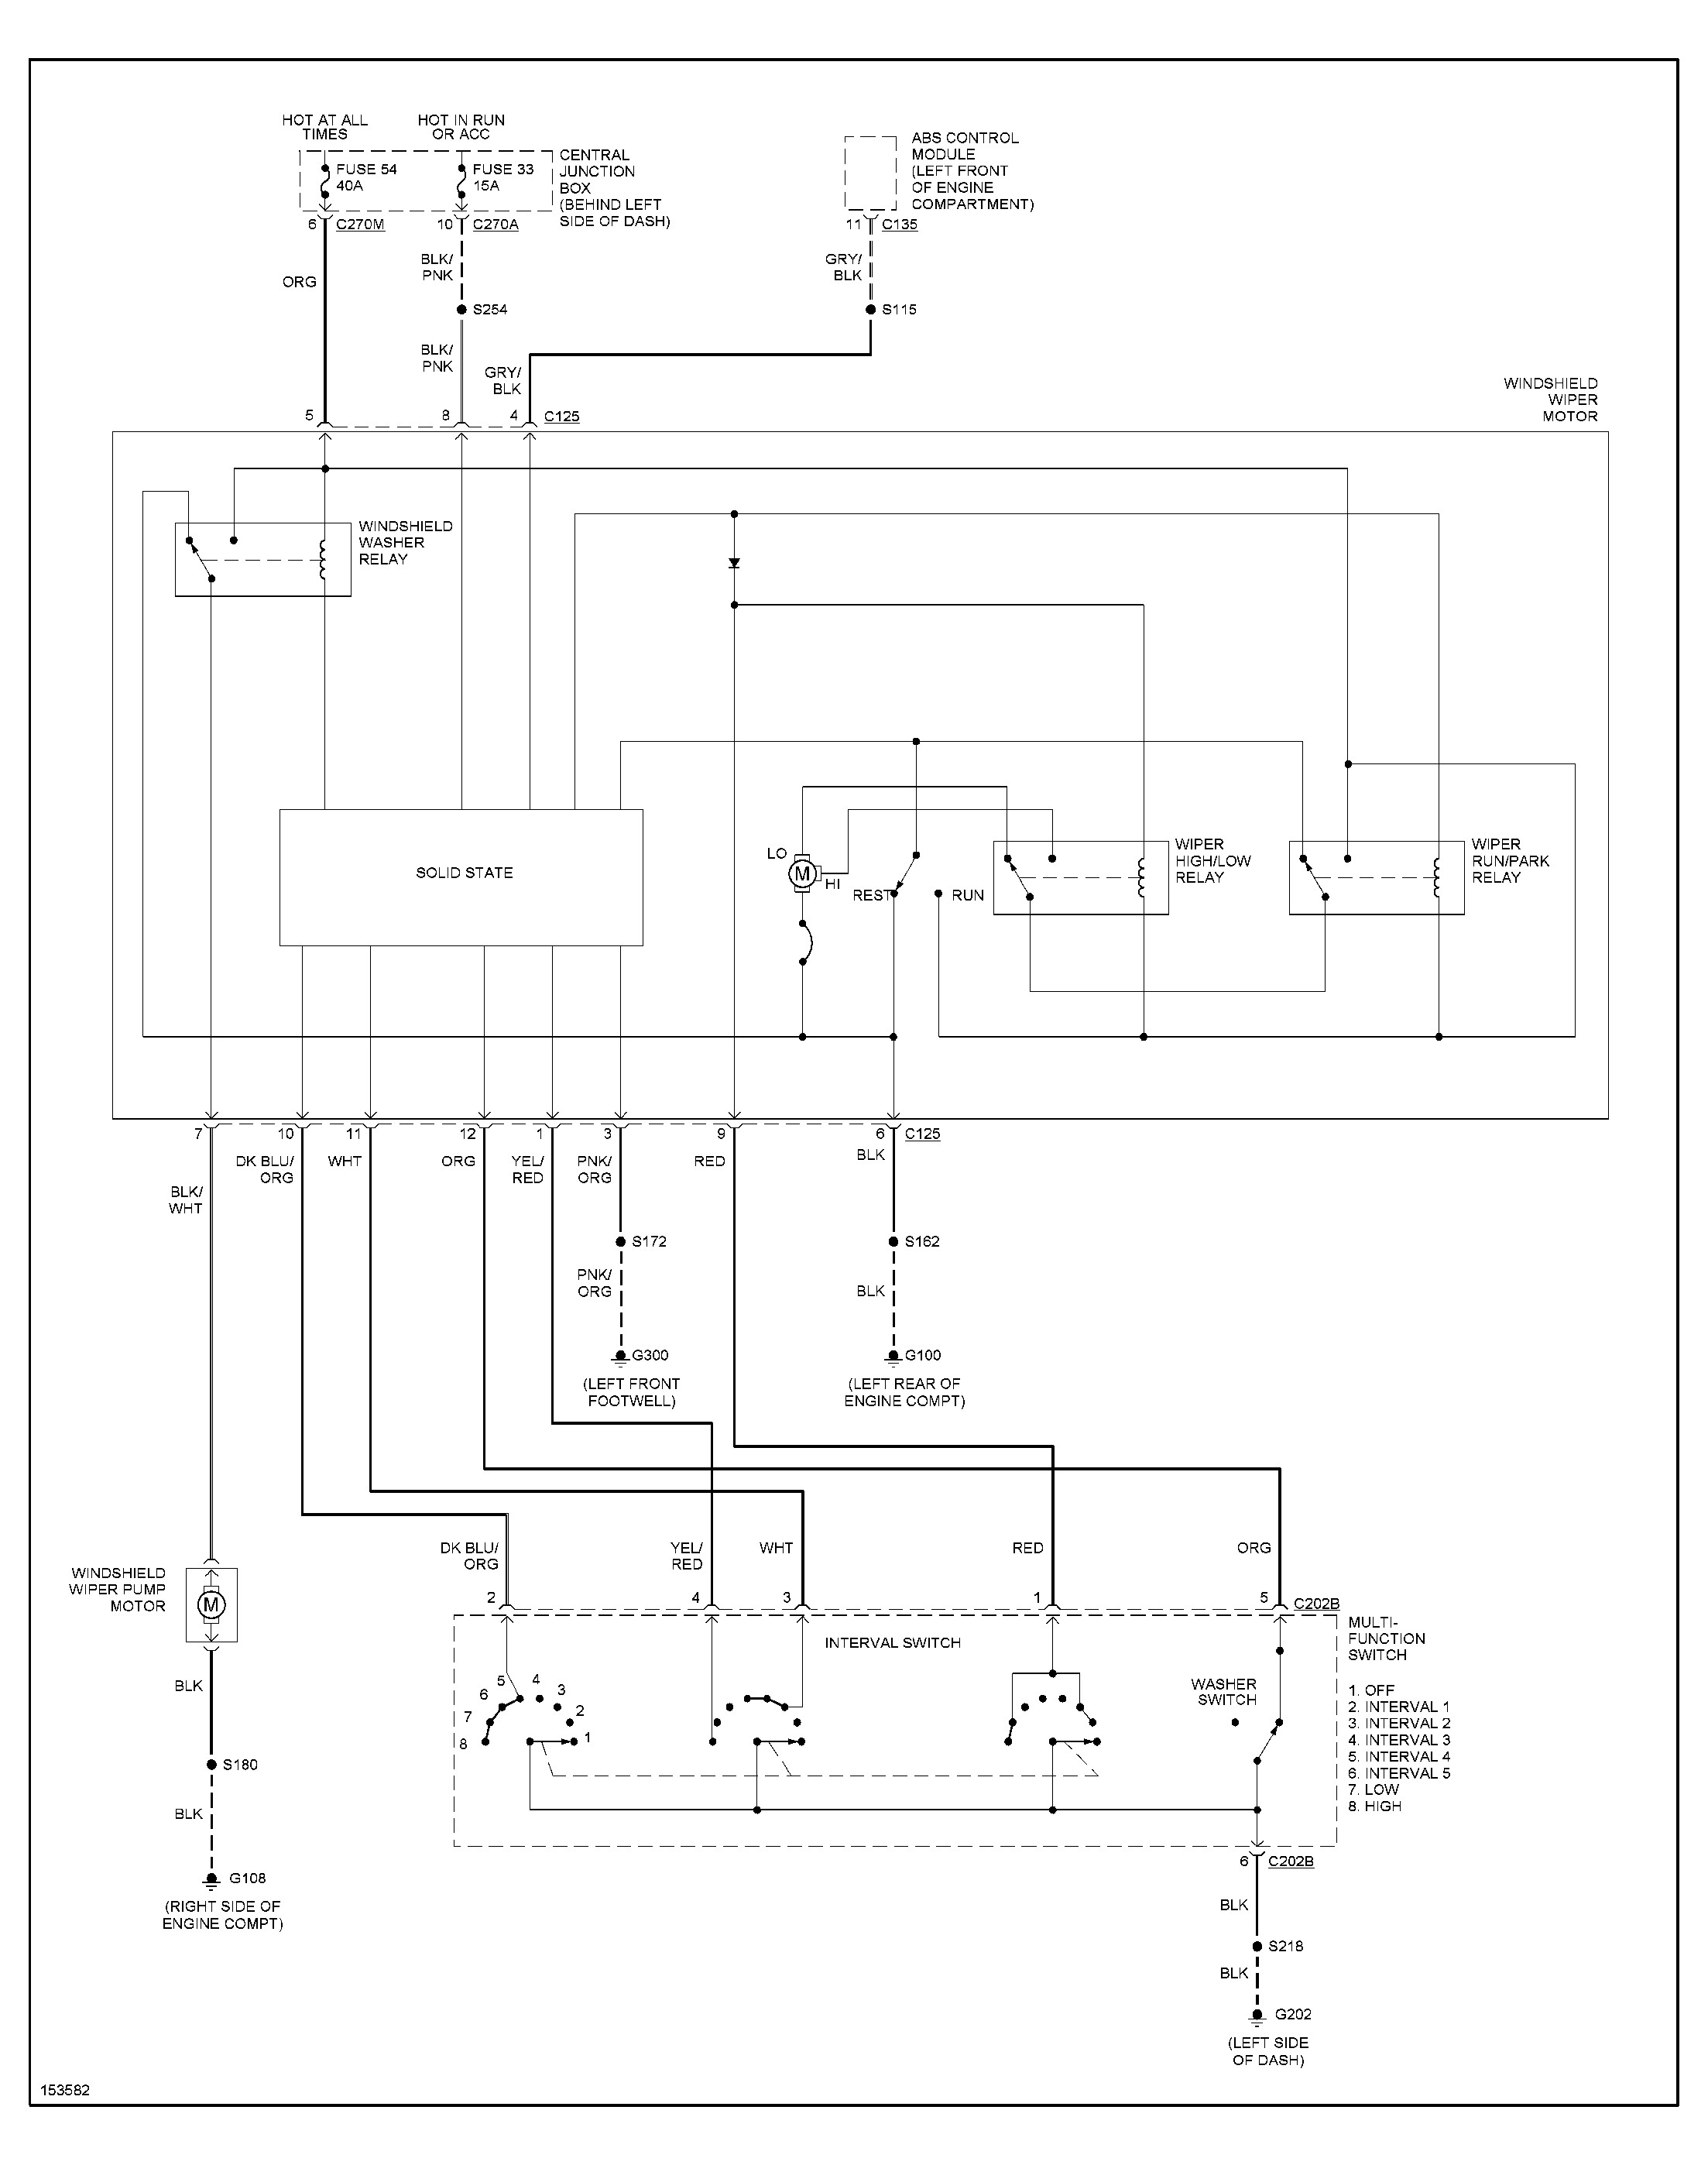 06 f750 fuse diagram search for wiring diagrams u2022 rh stephenpoon co 2014 Ford F650 Super